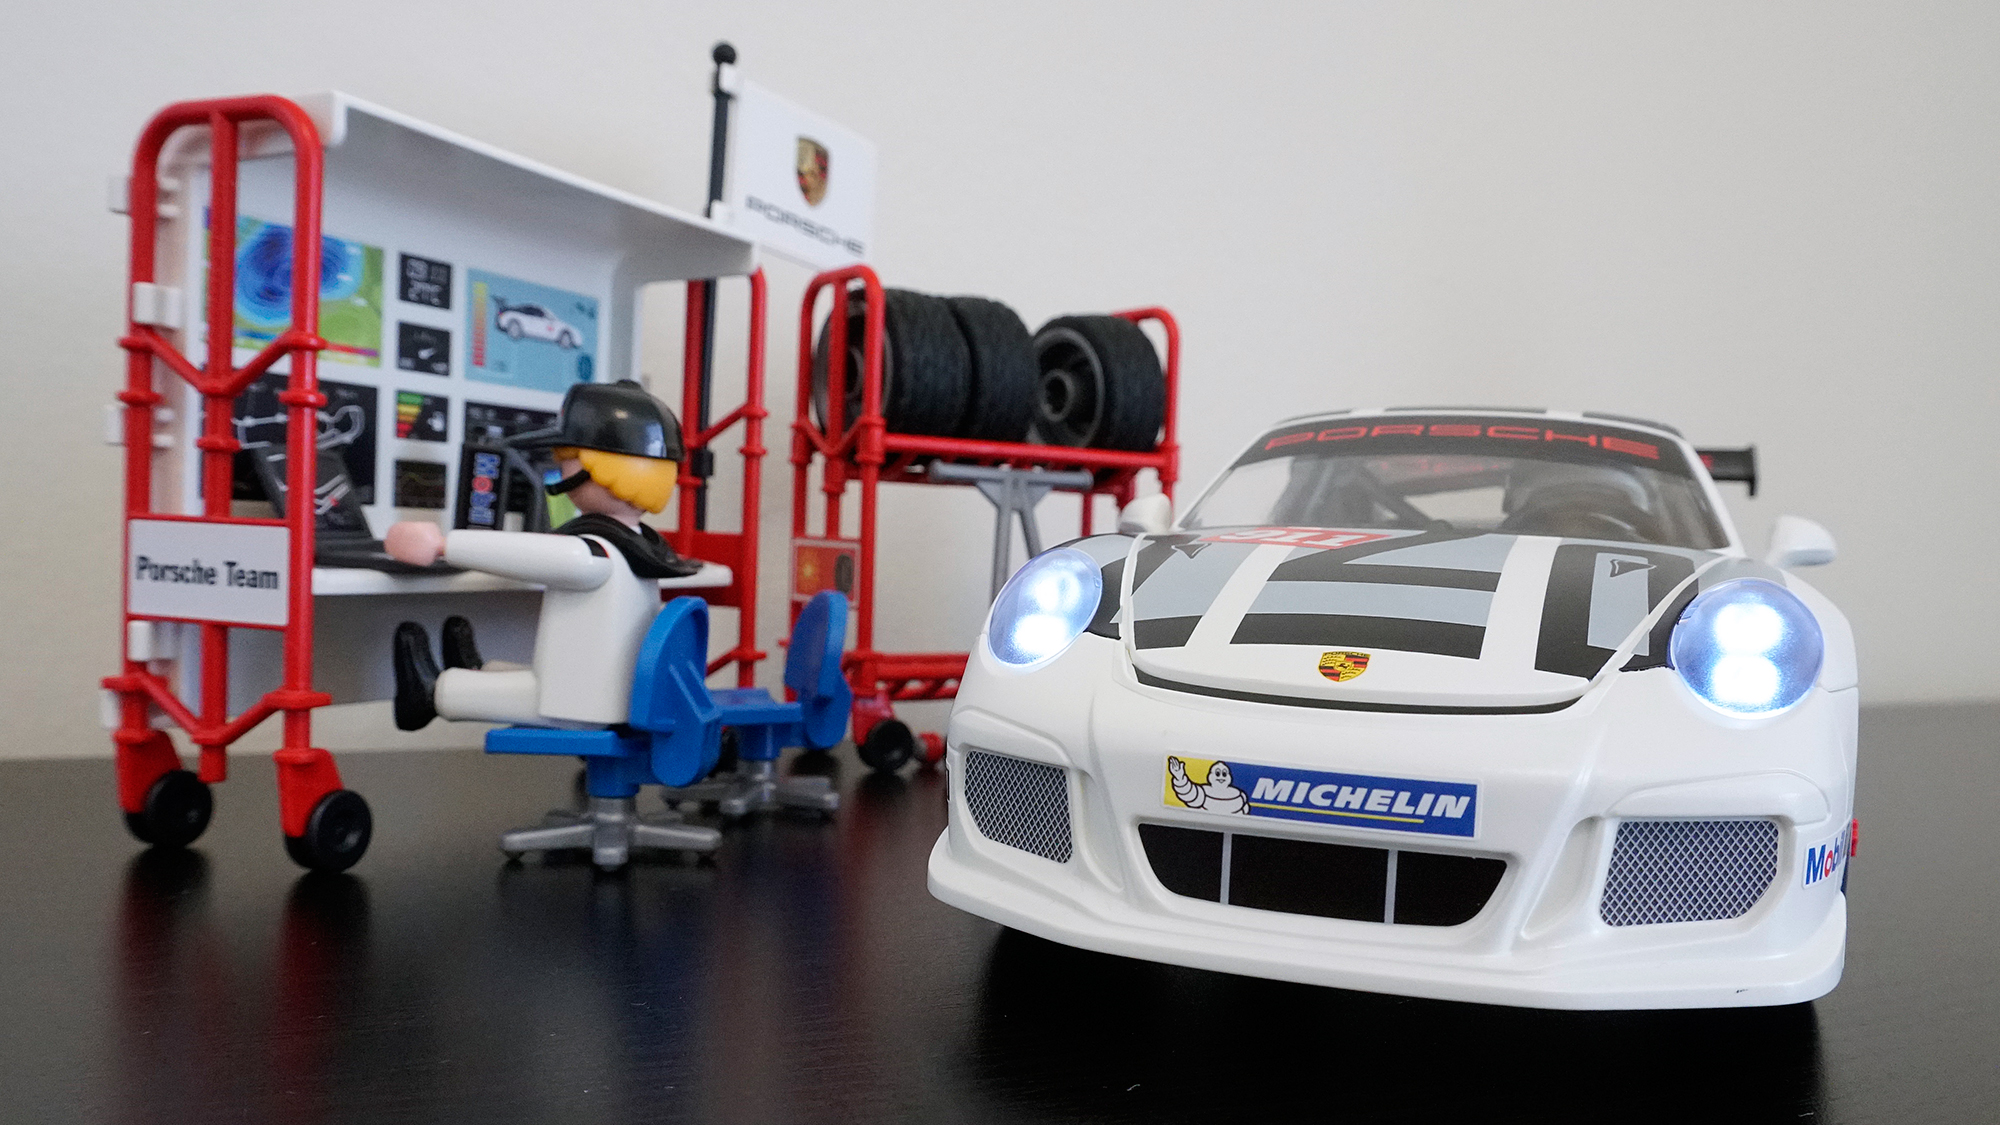 Playmobil’s New Porsche 911 GT3 Cup Will Solve Your Mid-Life Crisis For Way Less Than $200,000